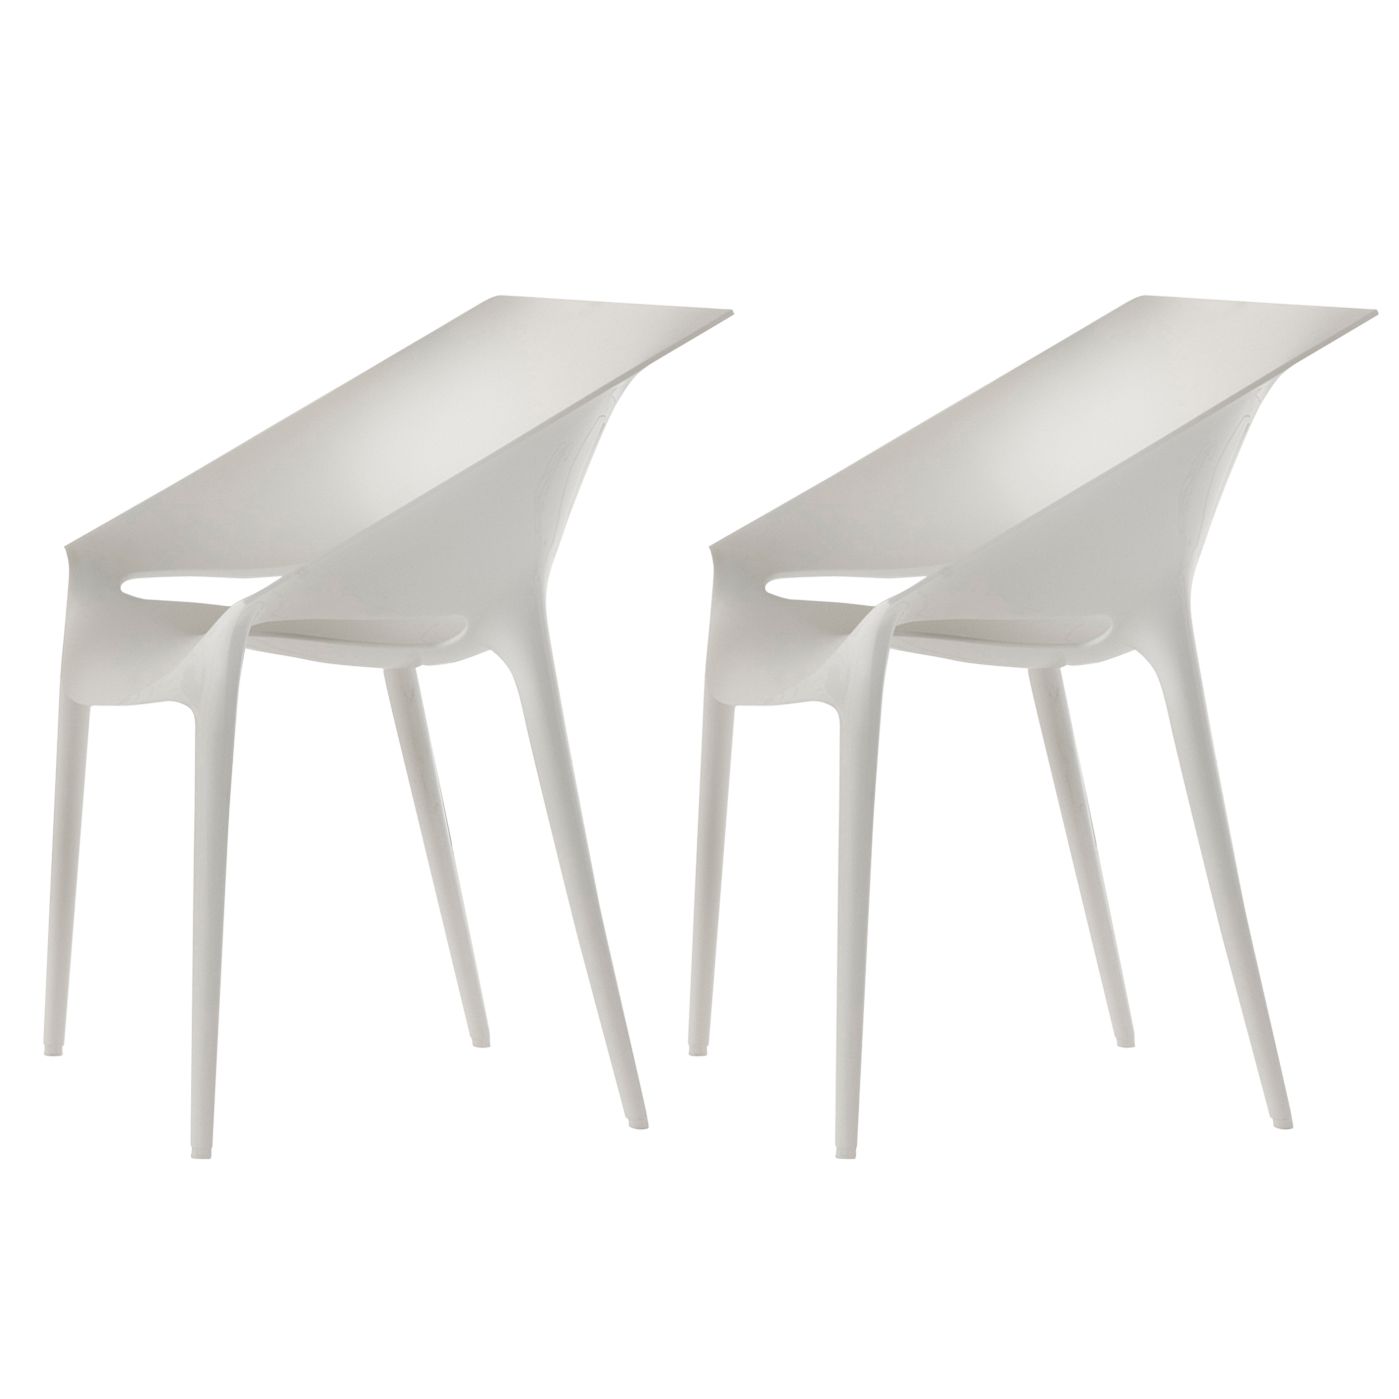 Philippe Starck for Kartell Dr.Yes Chair, White, Pair at John Lewis